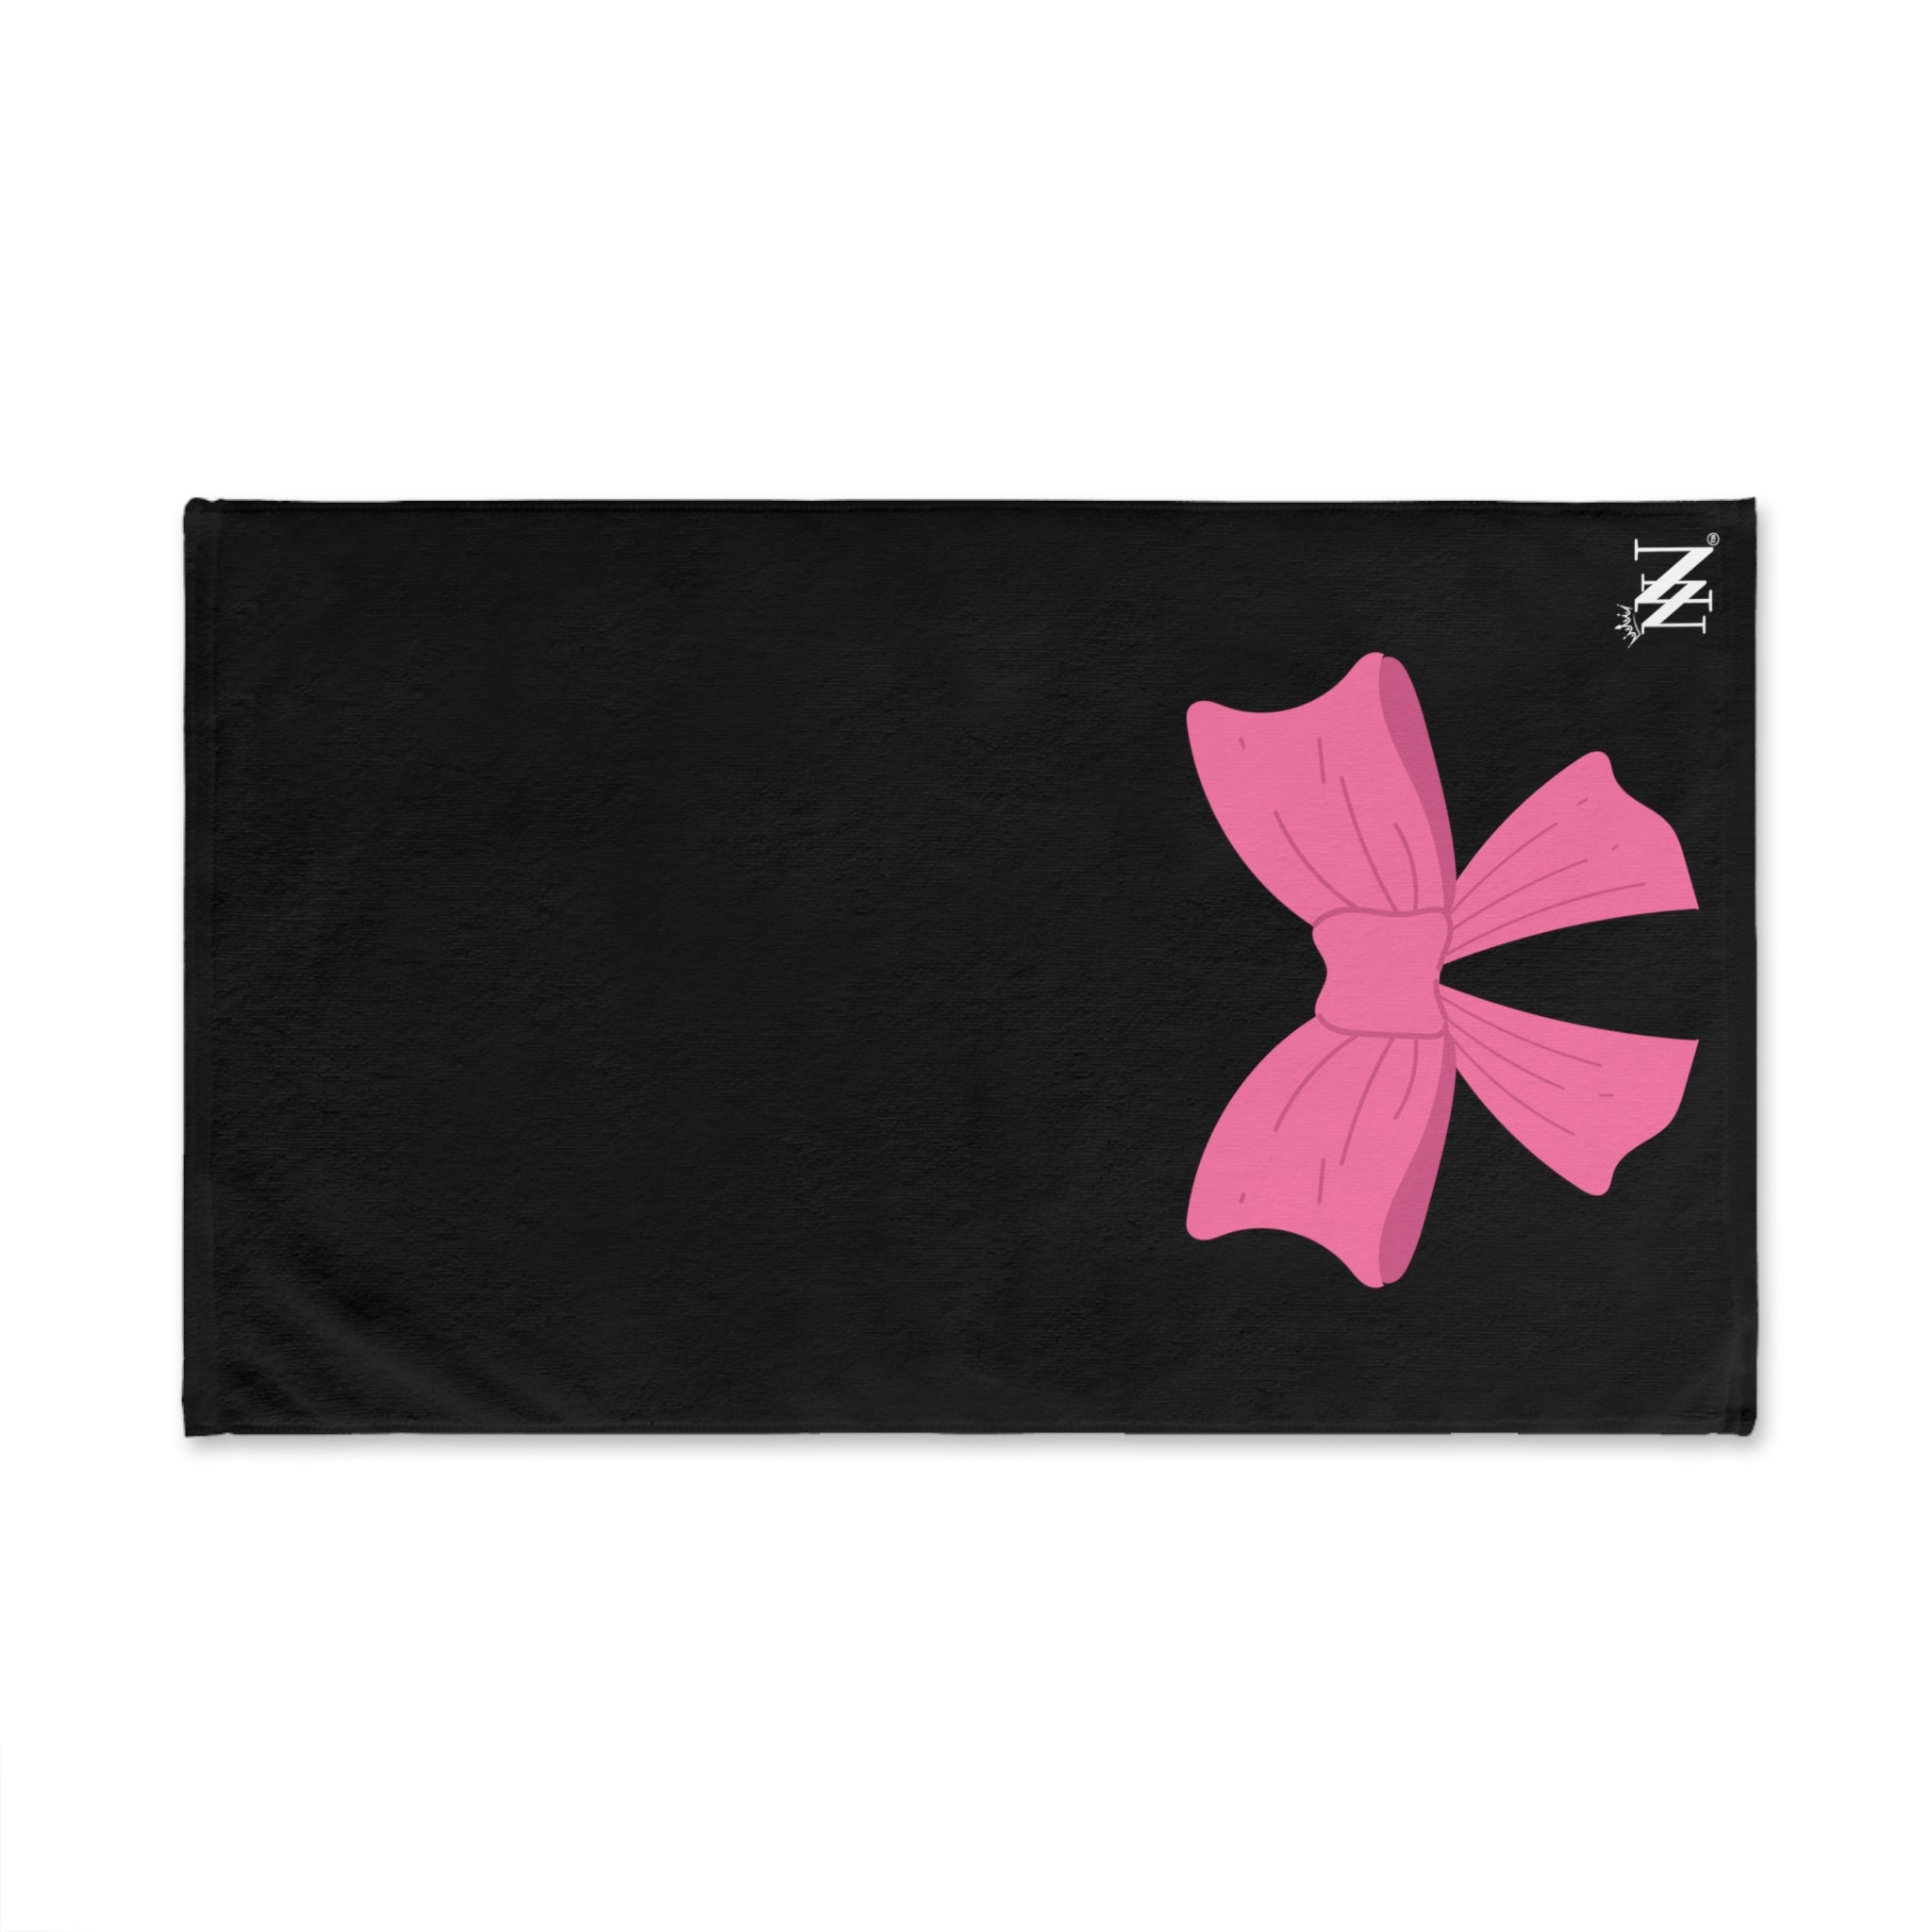 Bow Ribbon Pink Black | Sexy Gifts for Boyfriend, Funny Towel Romantic Gift for Wedding Couple Fiance First Year 2nd Anniversary Valentines, Party Gag Gifts, Joke Humor Cloth for Husband Men BF NECTAR NAPKINS